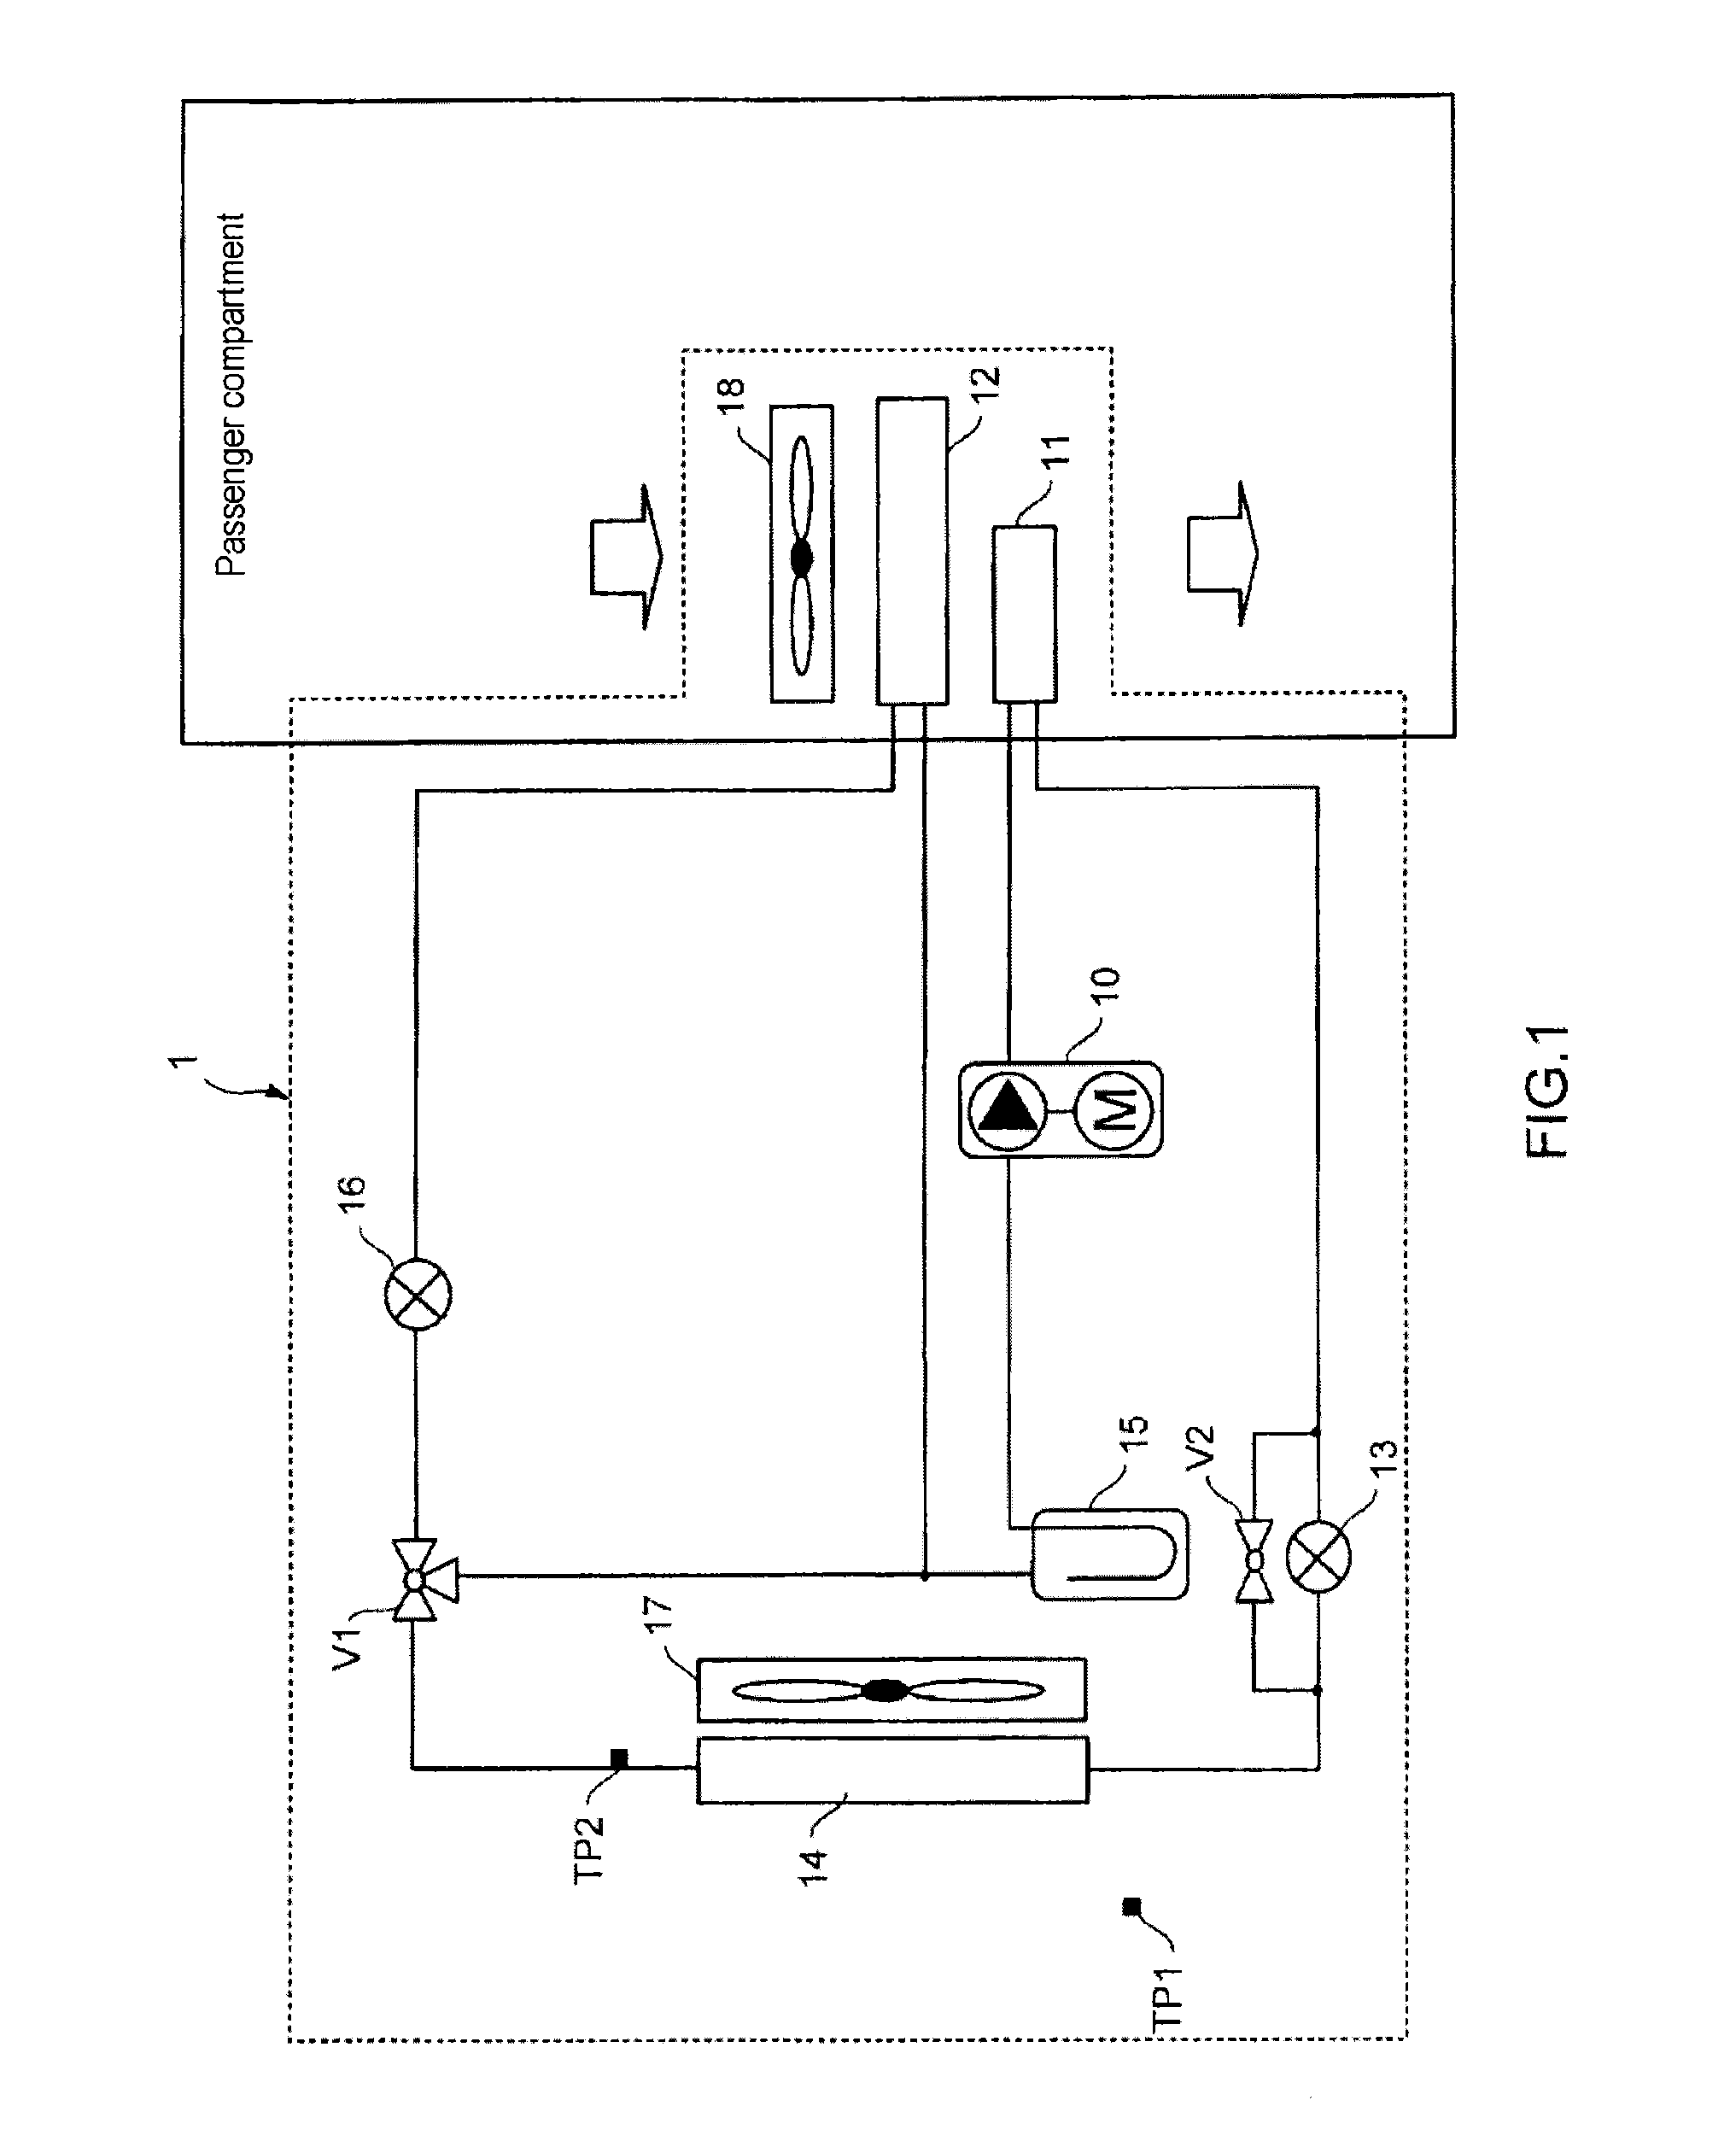 Automatic control method used for defrosting a heat pump for a vehicle